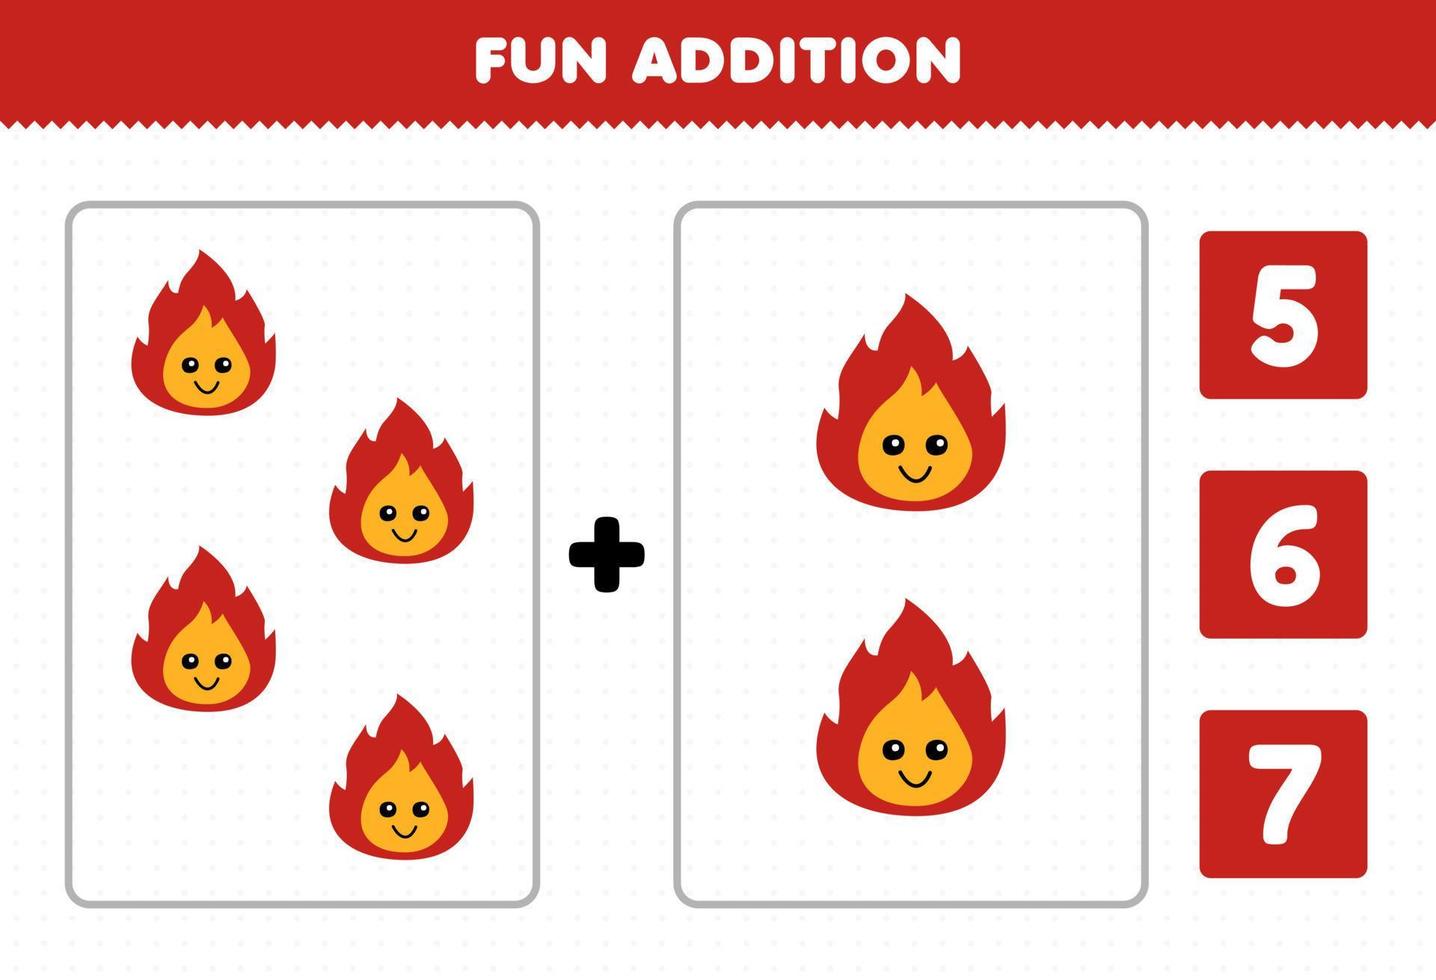 Education game for children fun addition by count and choose the correct answer of cute cartoon fire printable nature worksheet vector